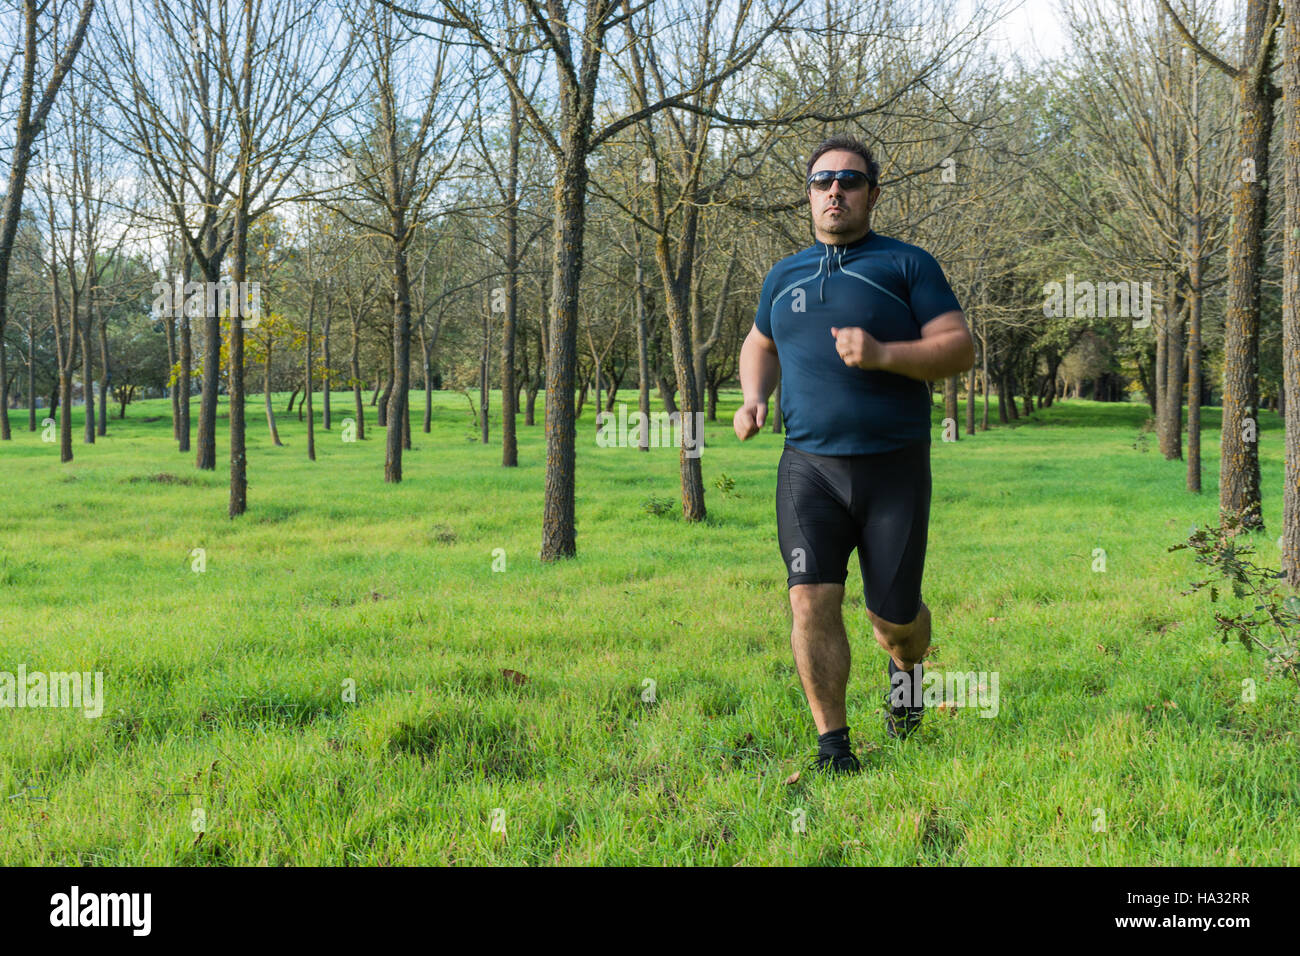 Big belly man jogging , exercising, doing cardio in the park , slightly overweight, loosing weight. On a lawn of green grass between trees without lea Stock Photo